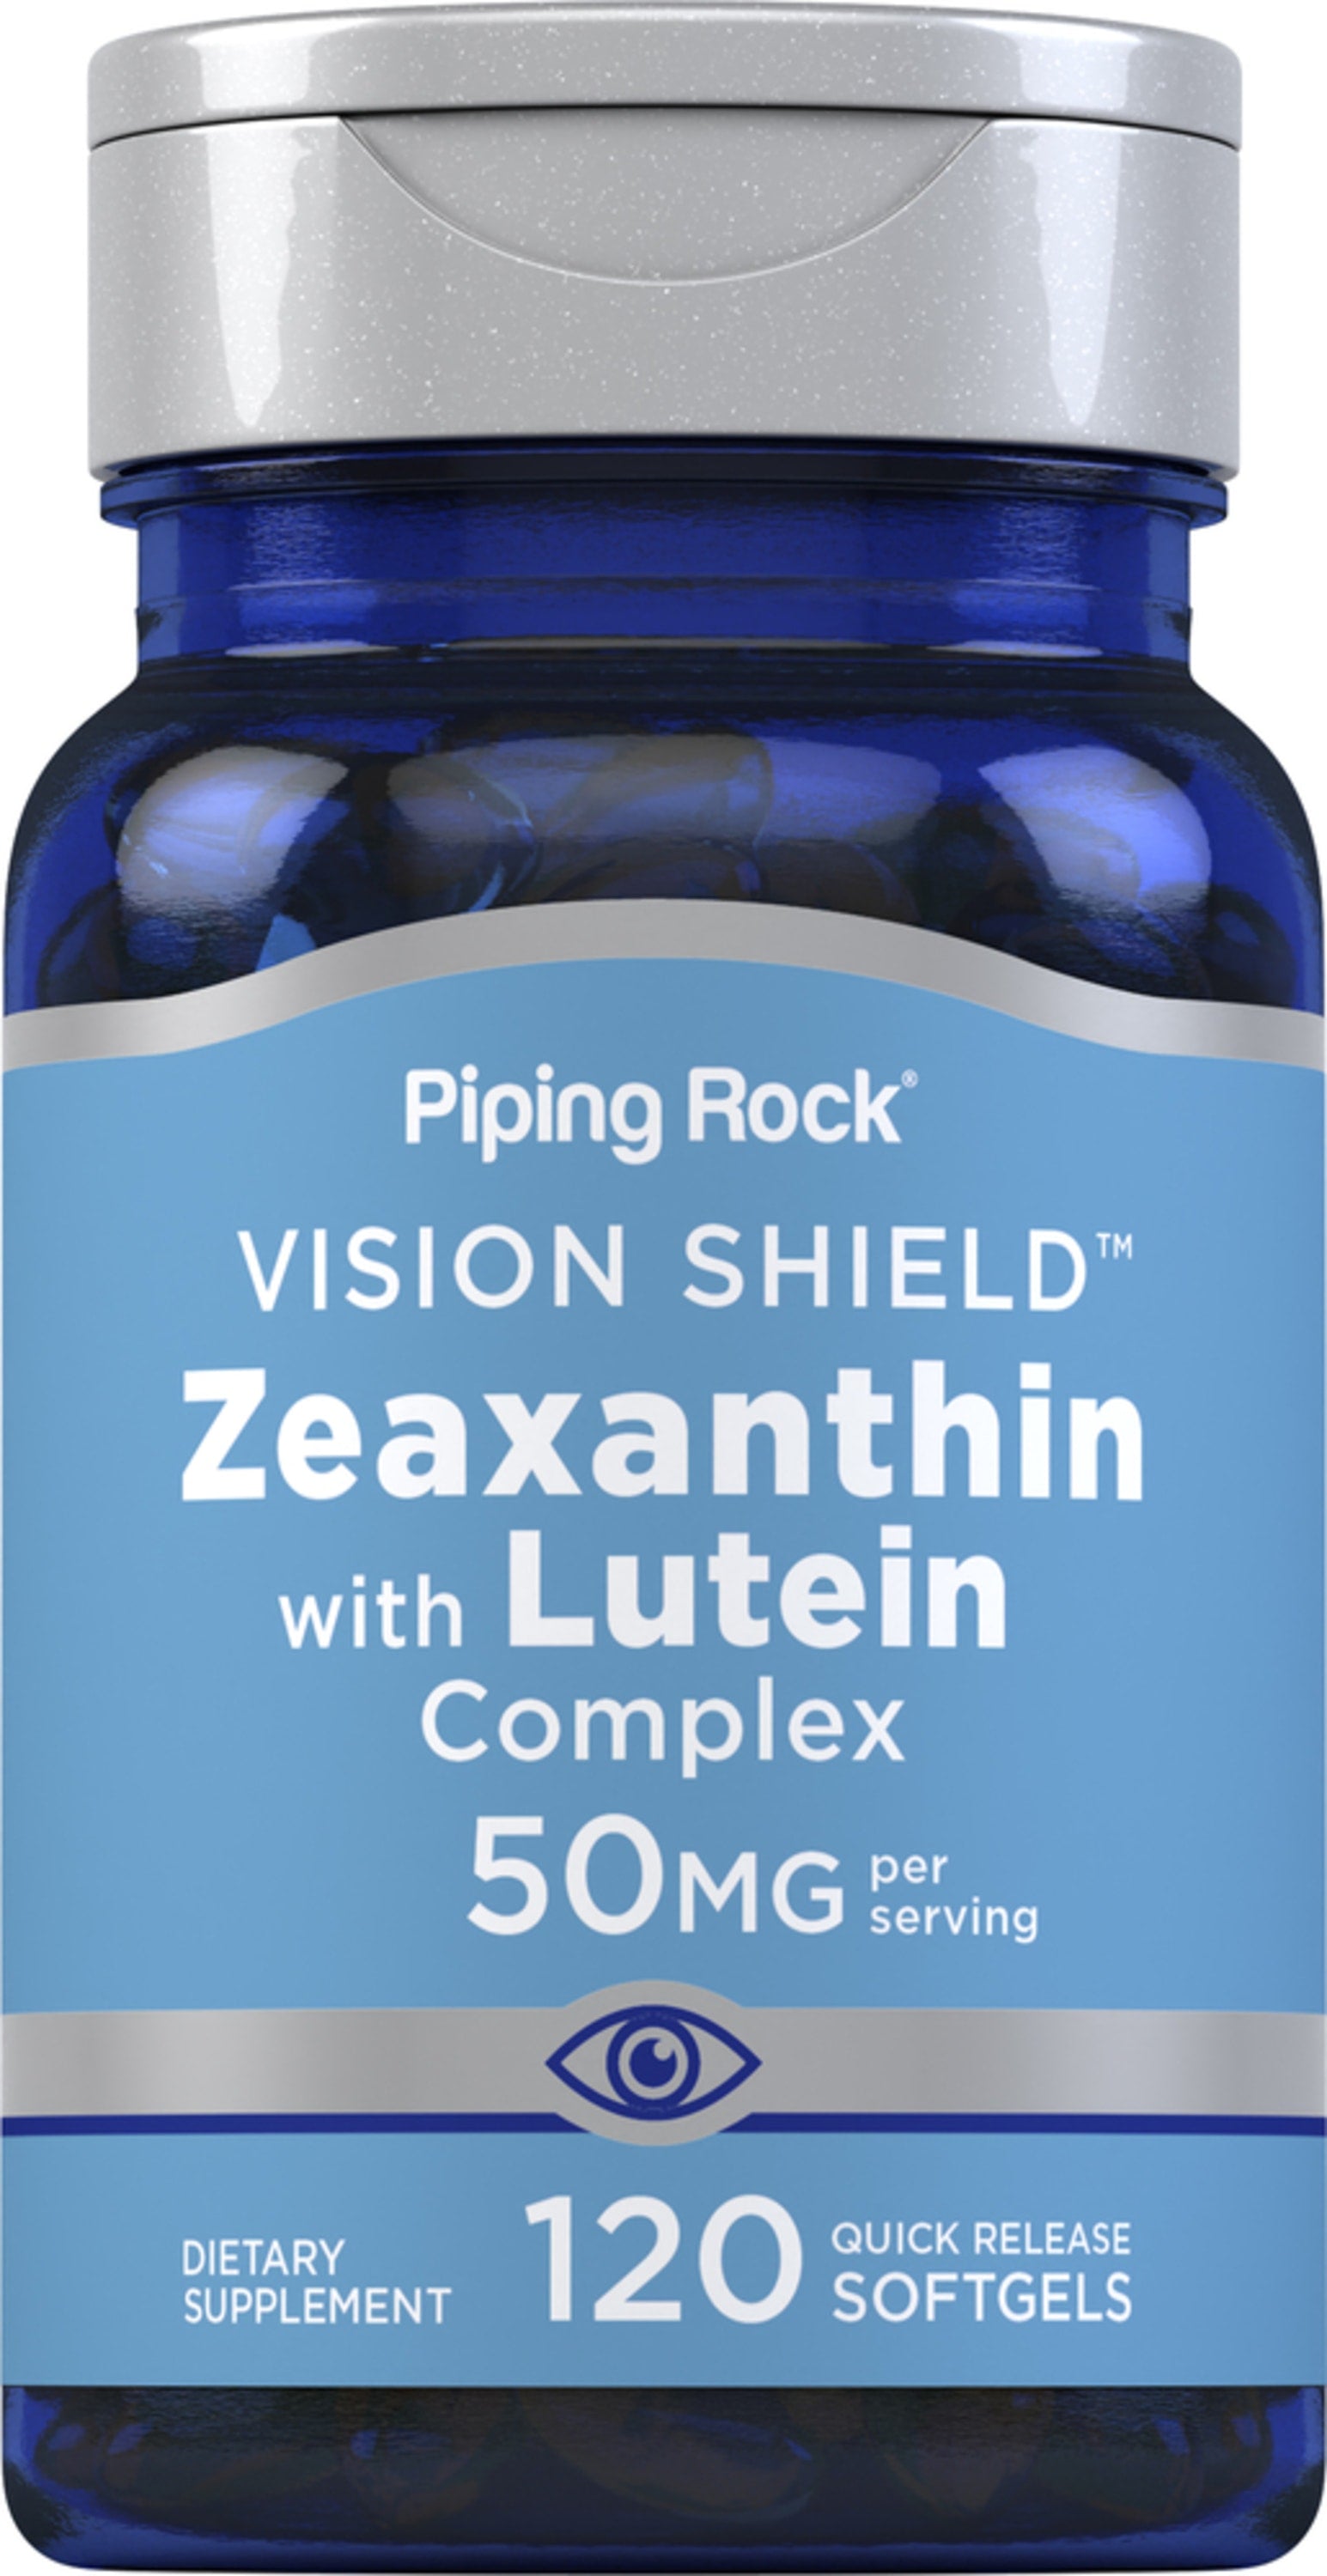 Zeaxanthin with Lutein Complex, 50 mg (per serving), 120 Quick Release Softgels